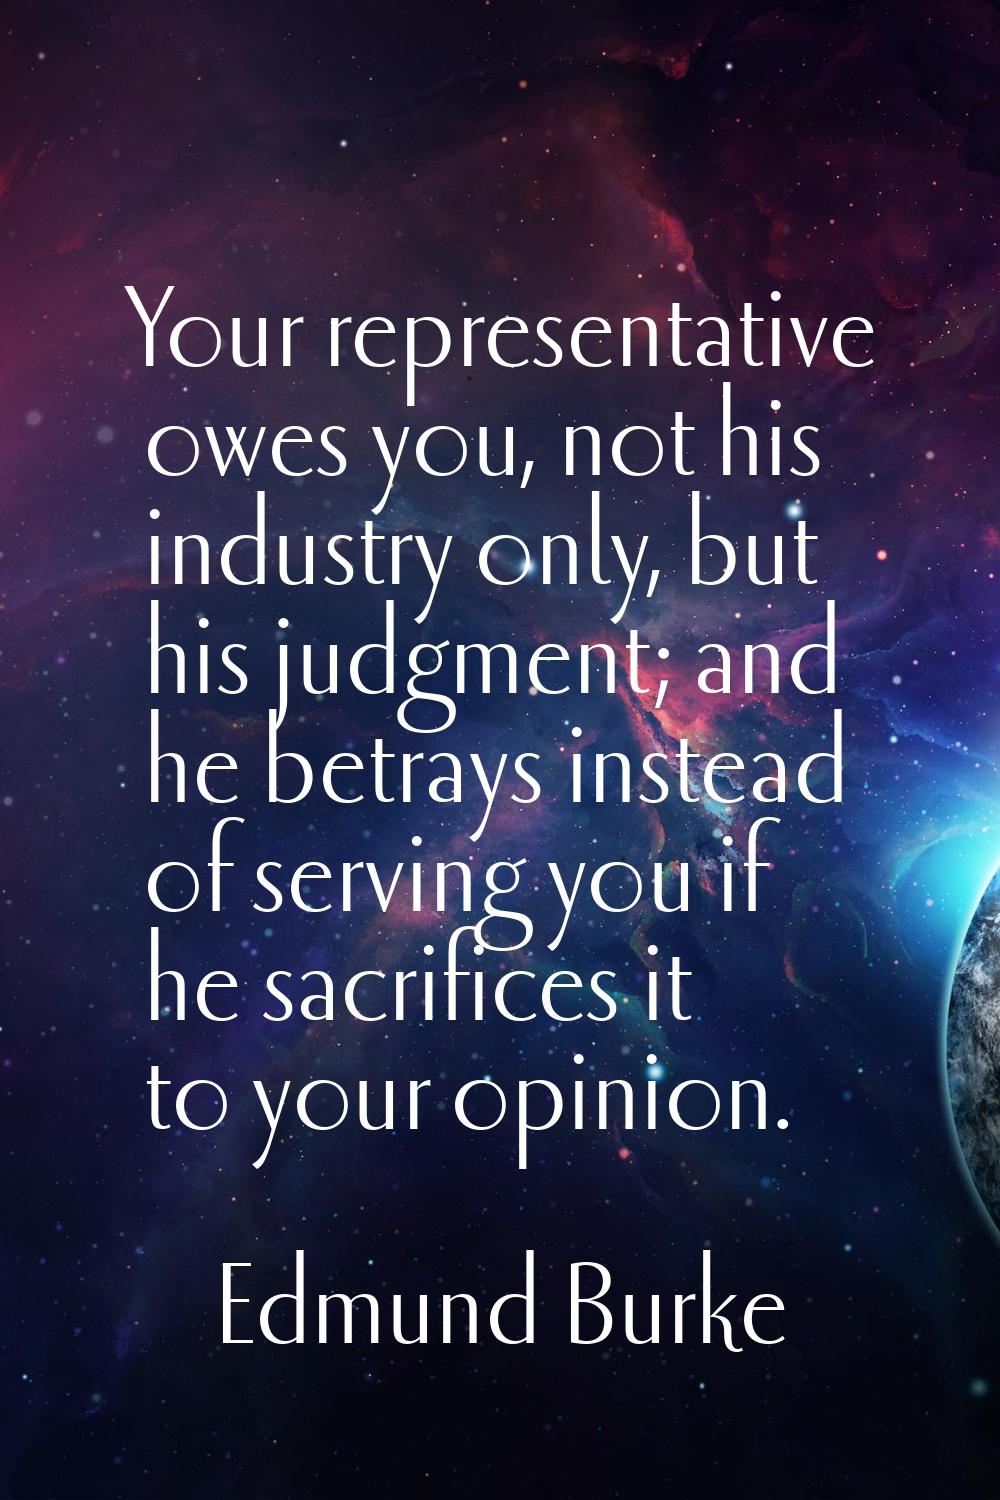 Your representative owes you, not his industry only, but his judgment; and he betrays instead of se